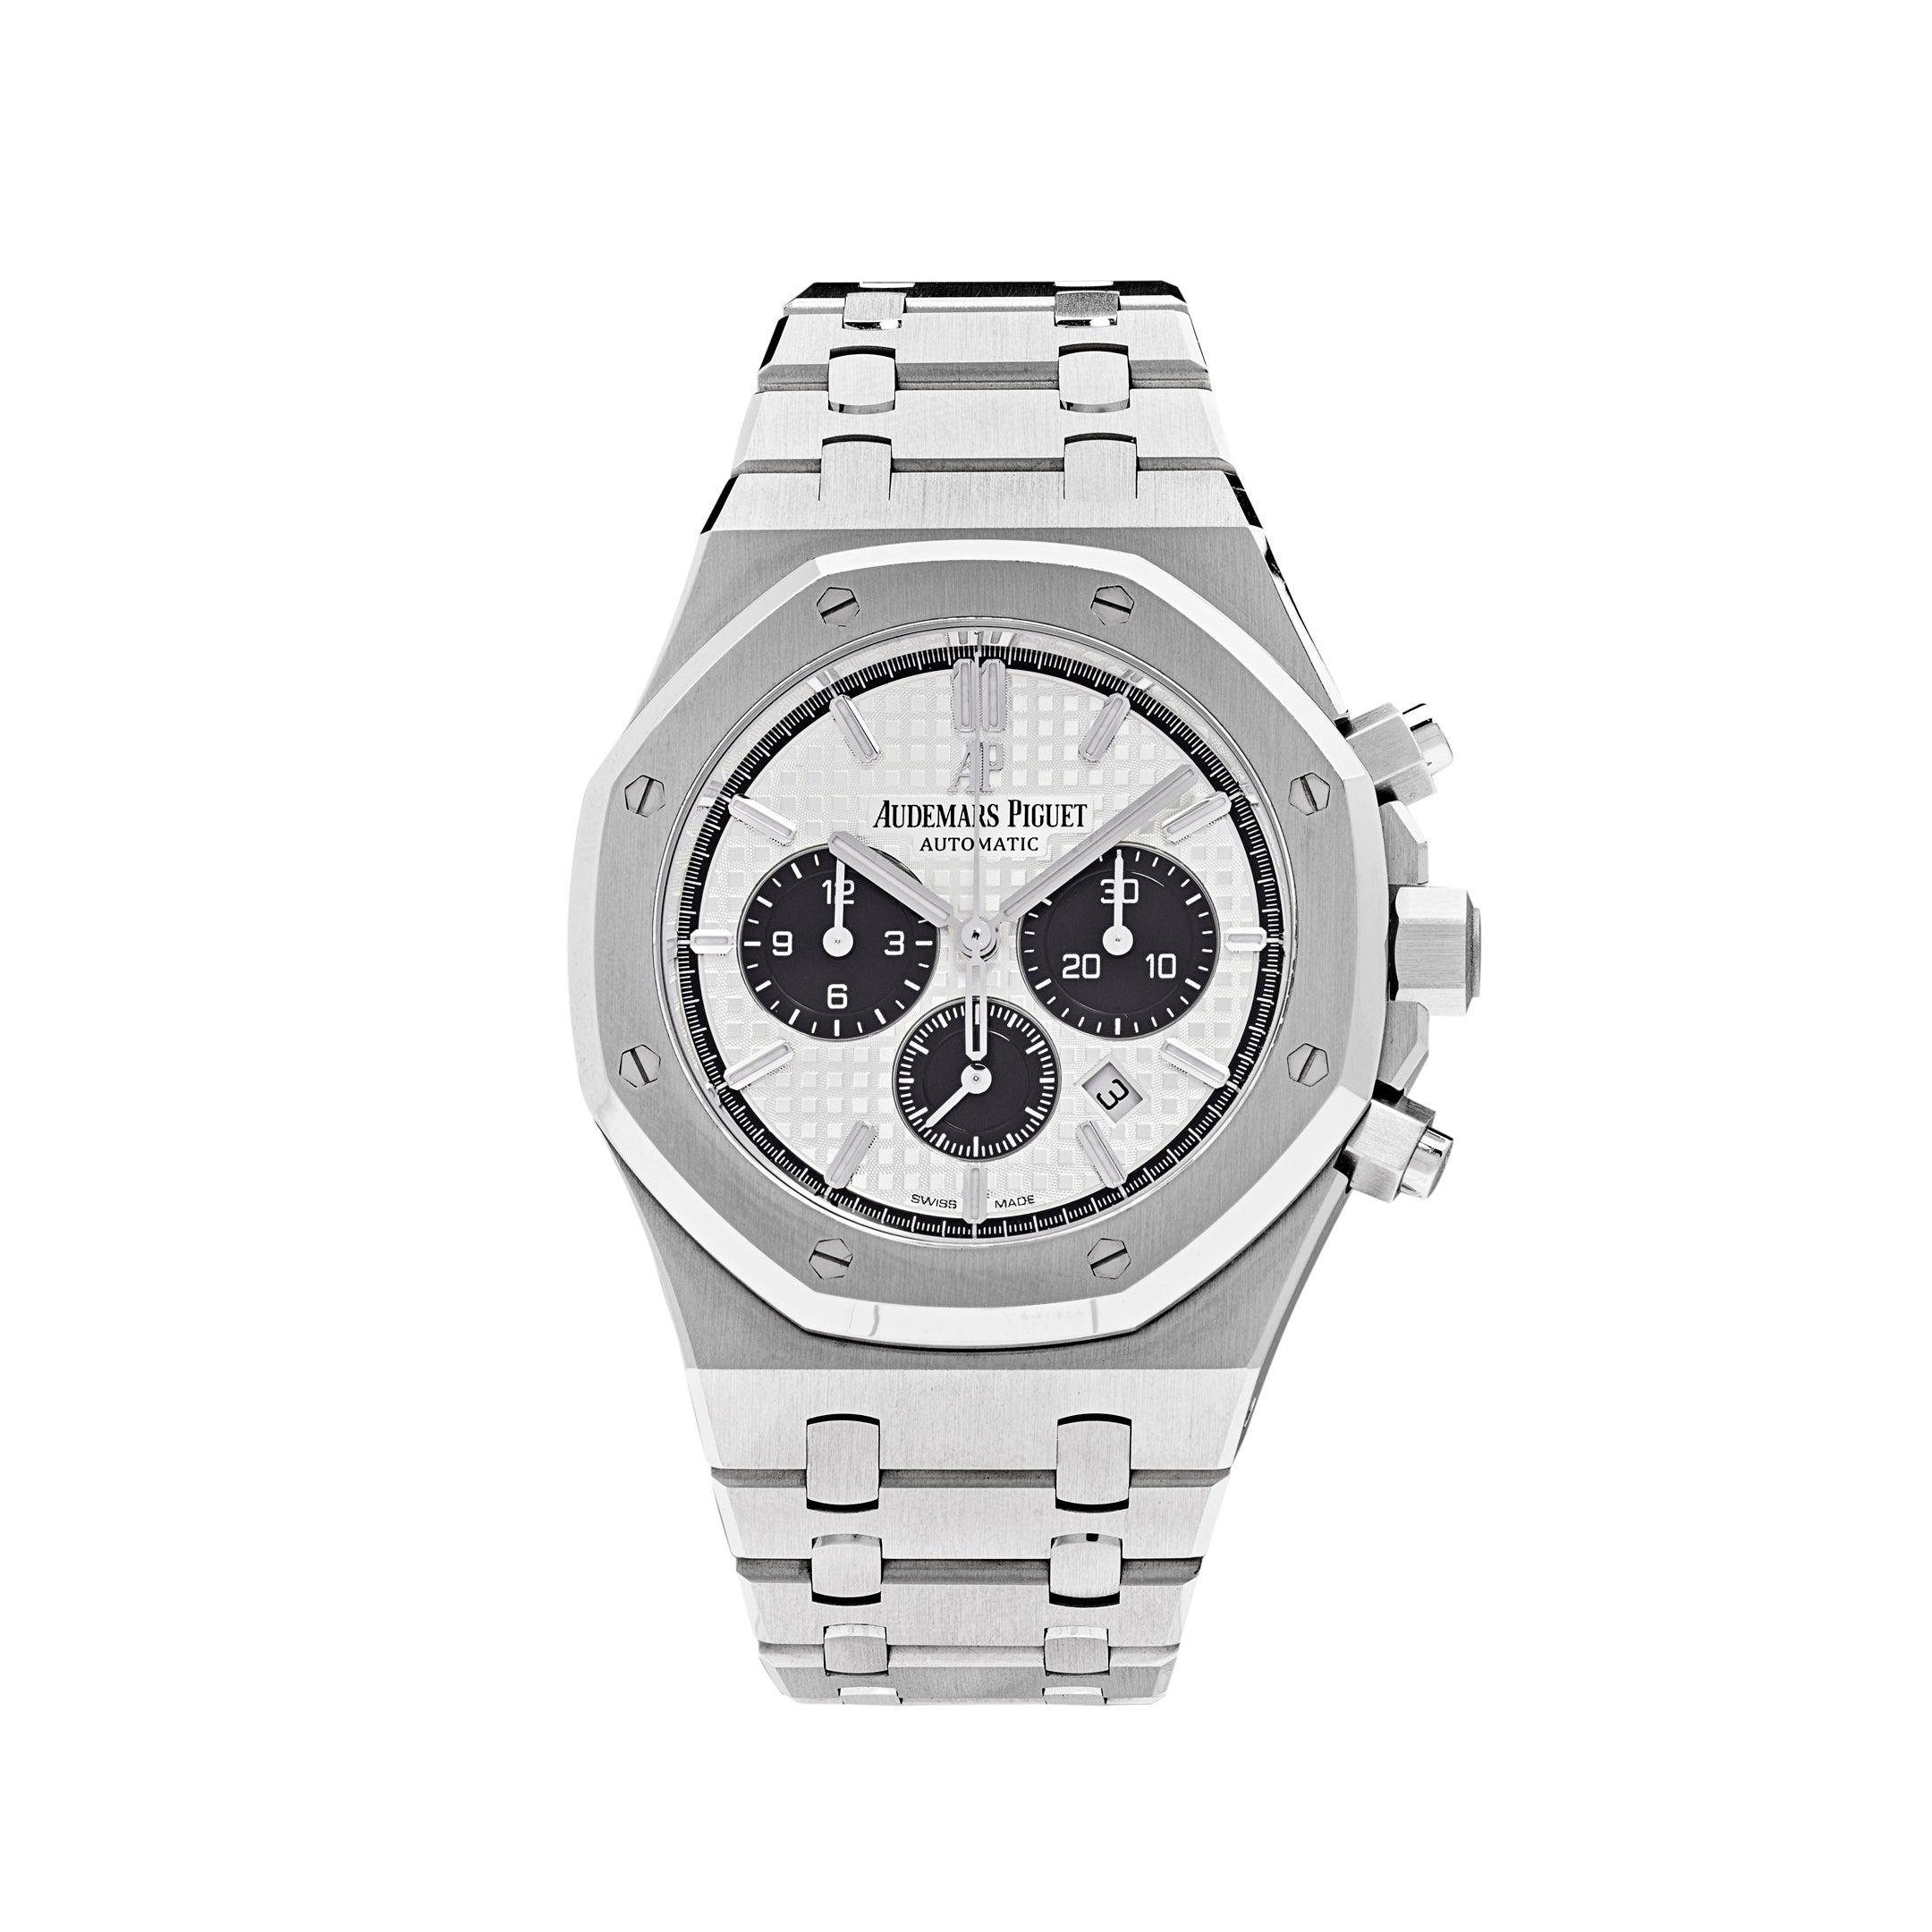 ***This timepiece has been polished and it's in mint condition.

The Royal Oak Selfwinding Chronograph features a self-winding chronograph with enlarged counters for instant readability. Designed in a 41mm stainless steel case and smooth bezel, this